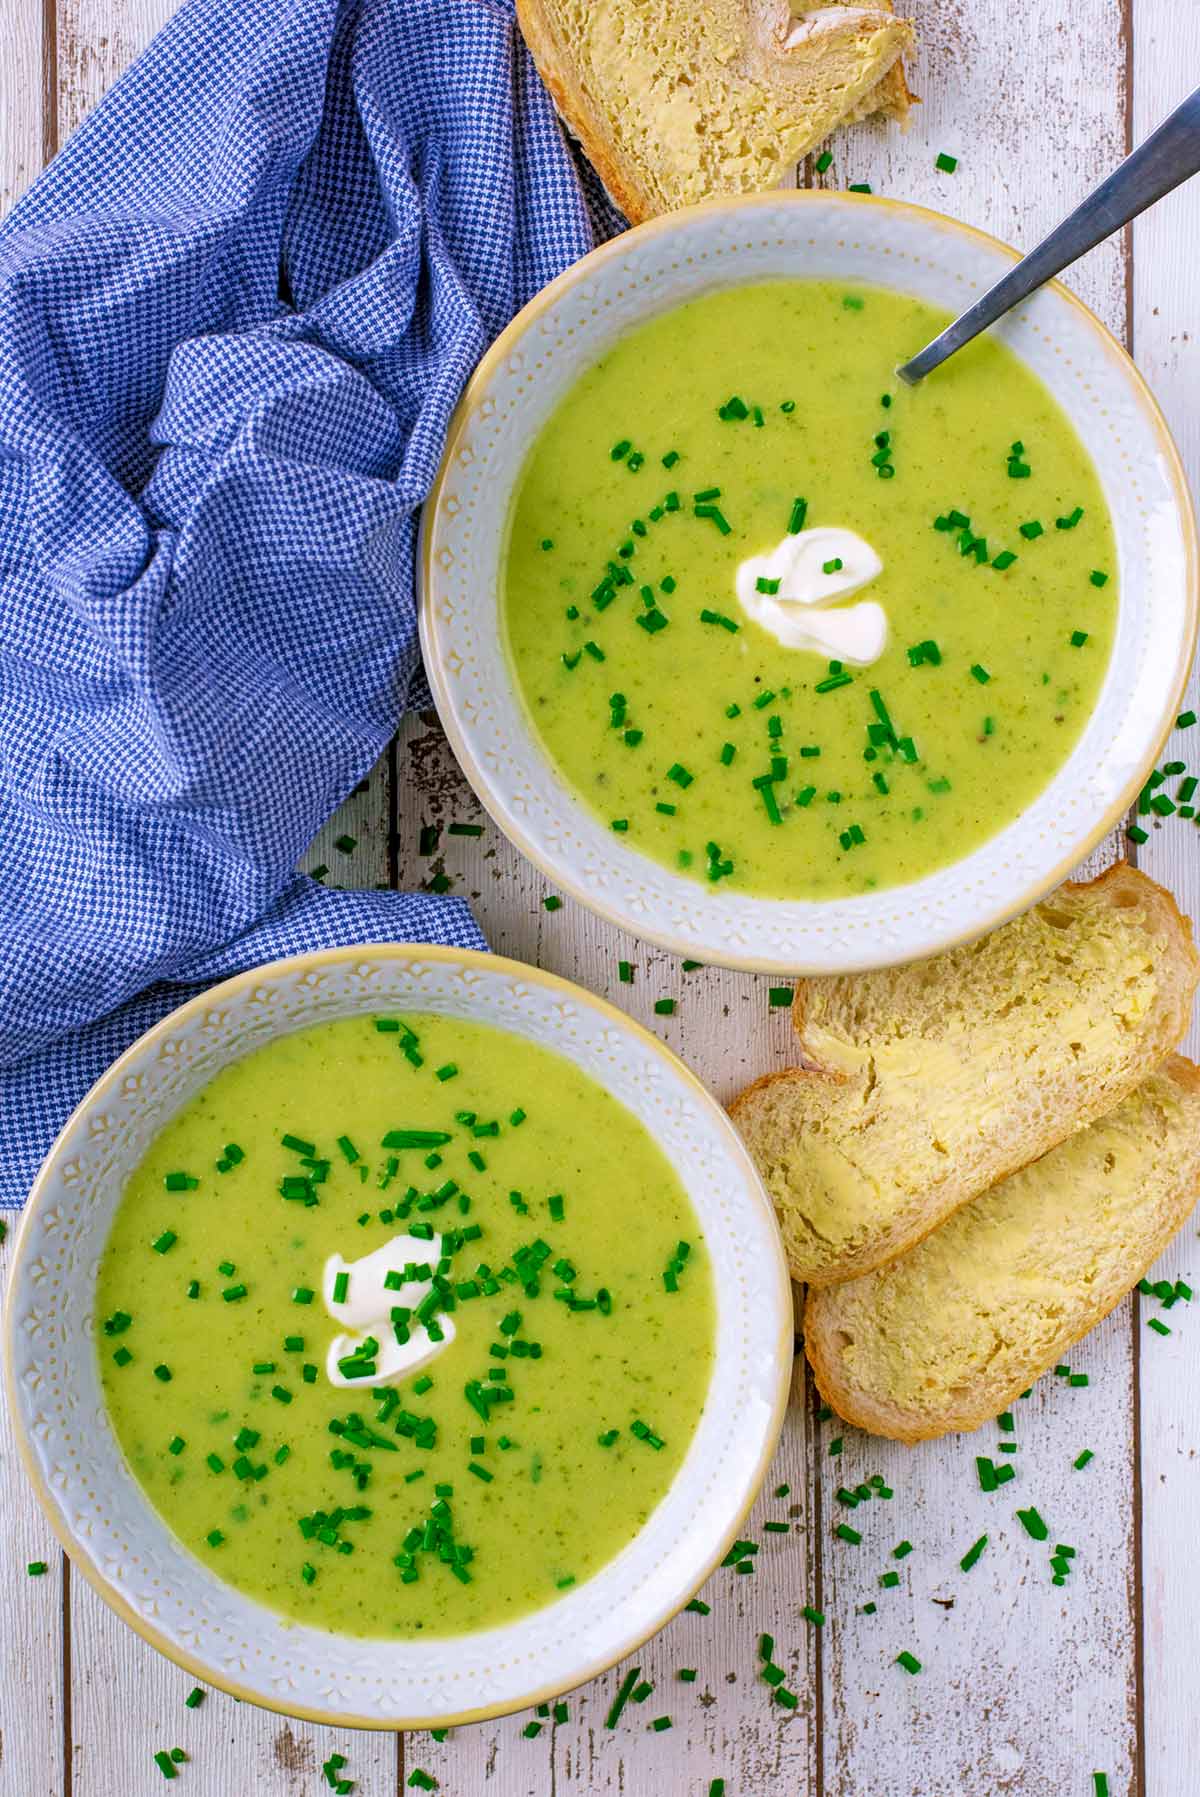 Two bowls of courgette soup with some buttered bread.